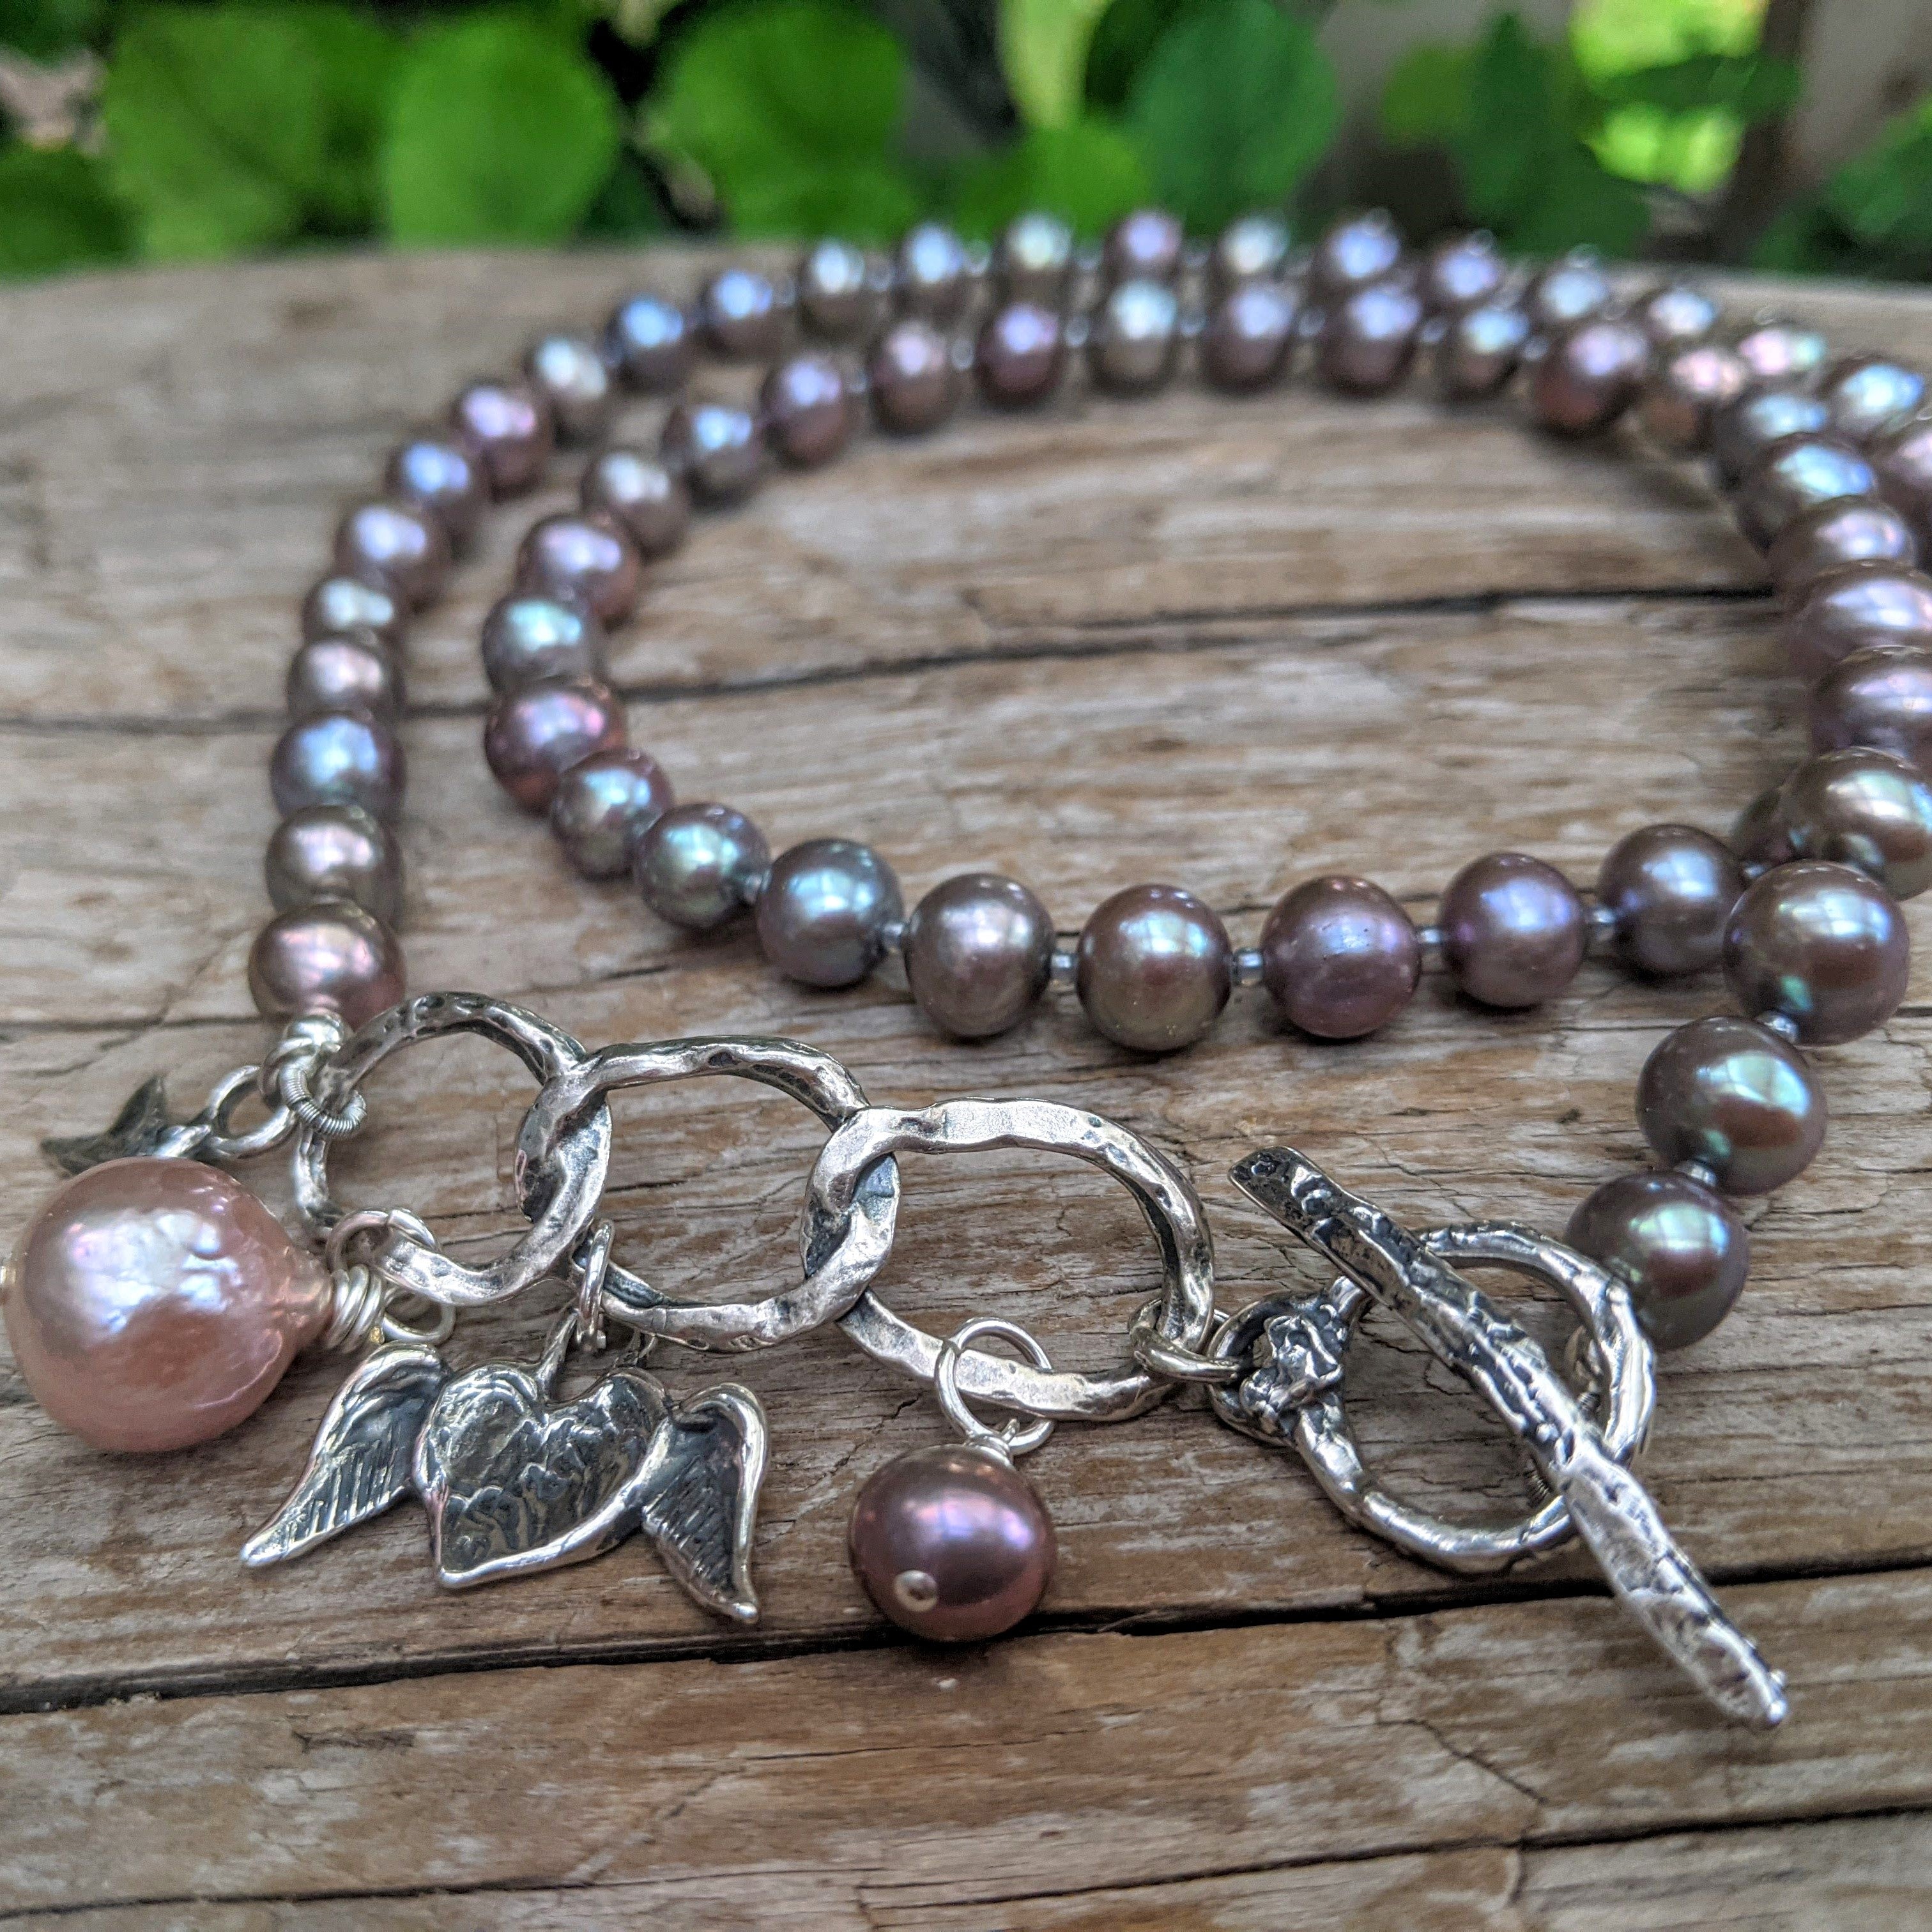 Grey pearl necklace, organic jewelry, rustic necklace, chunky necklace, Pink Edison pearl pendant , one of a kind necklace handcrafted by Aurora Creative Jewellery.